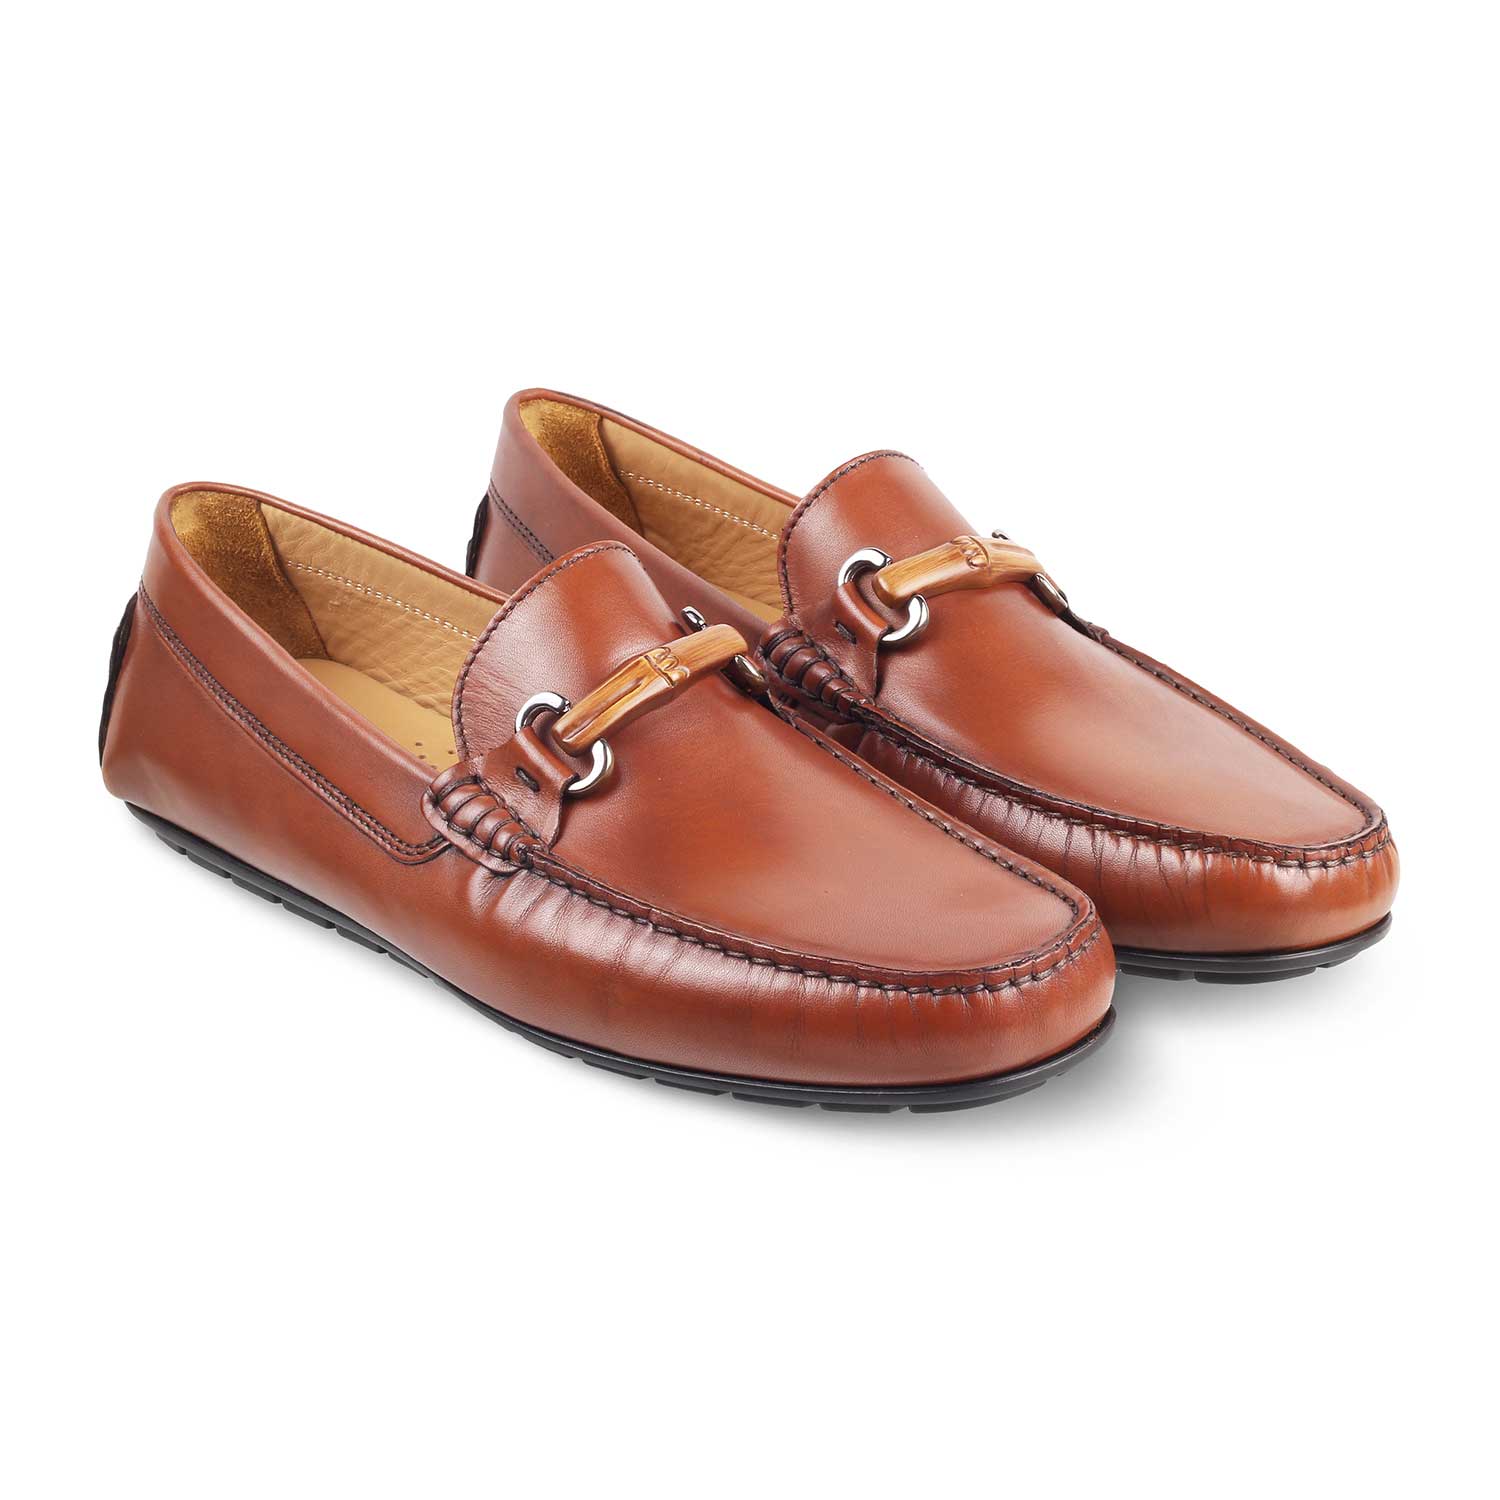 Tresmode-The Prodo Brown Men's Handcrafted Leather Driving Loafers Tresmode-Tresmode